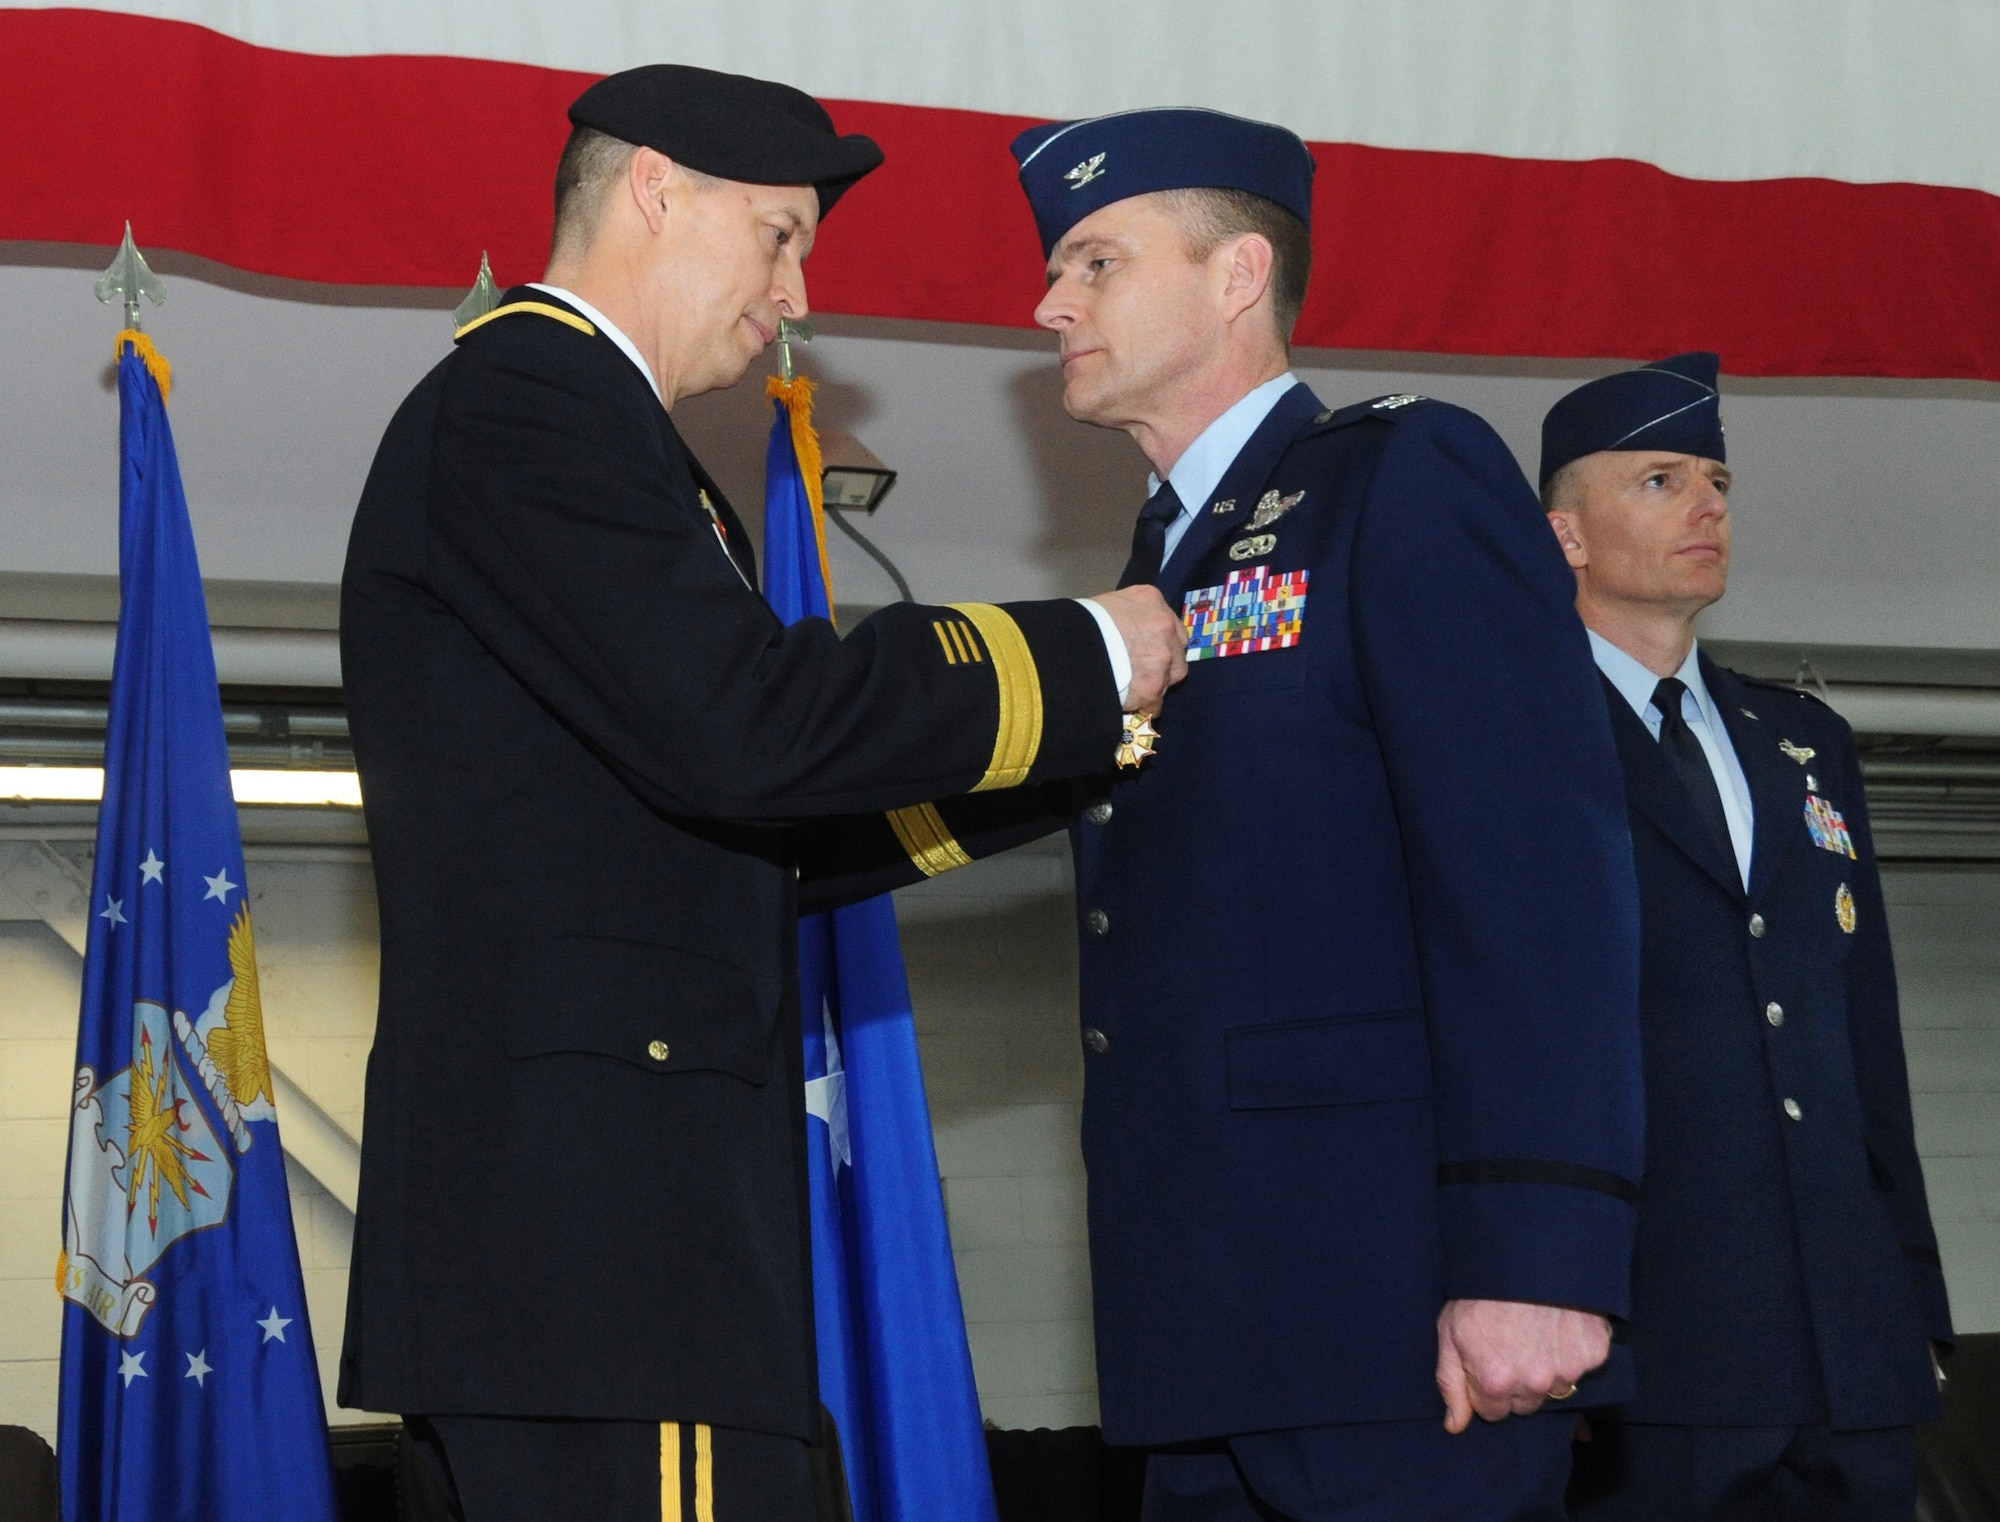 U.S. Air Force Col. Richard W. Wedan, outgoing commander 142nd Fighter Wing, right, is presented with The Legion of Merit Medal from Army Maj. Gen. Daniel R. Hokansen, The Adjutant General, Oregon, left, during the Change of Command ceremony for the 142nd Fighter Wing, Feb. 7, 2015, Portland Air National Guard Base, Ore. (U.S. Air National Guard photo by Tech. Sgt. John Hughel, 142nd Fighter Wing Public Affairs)